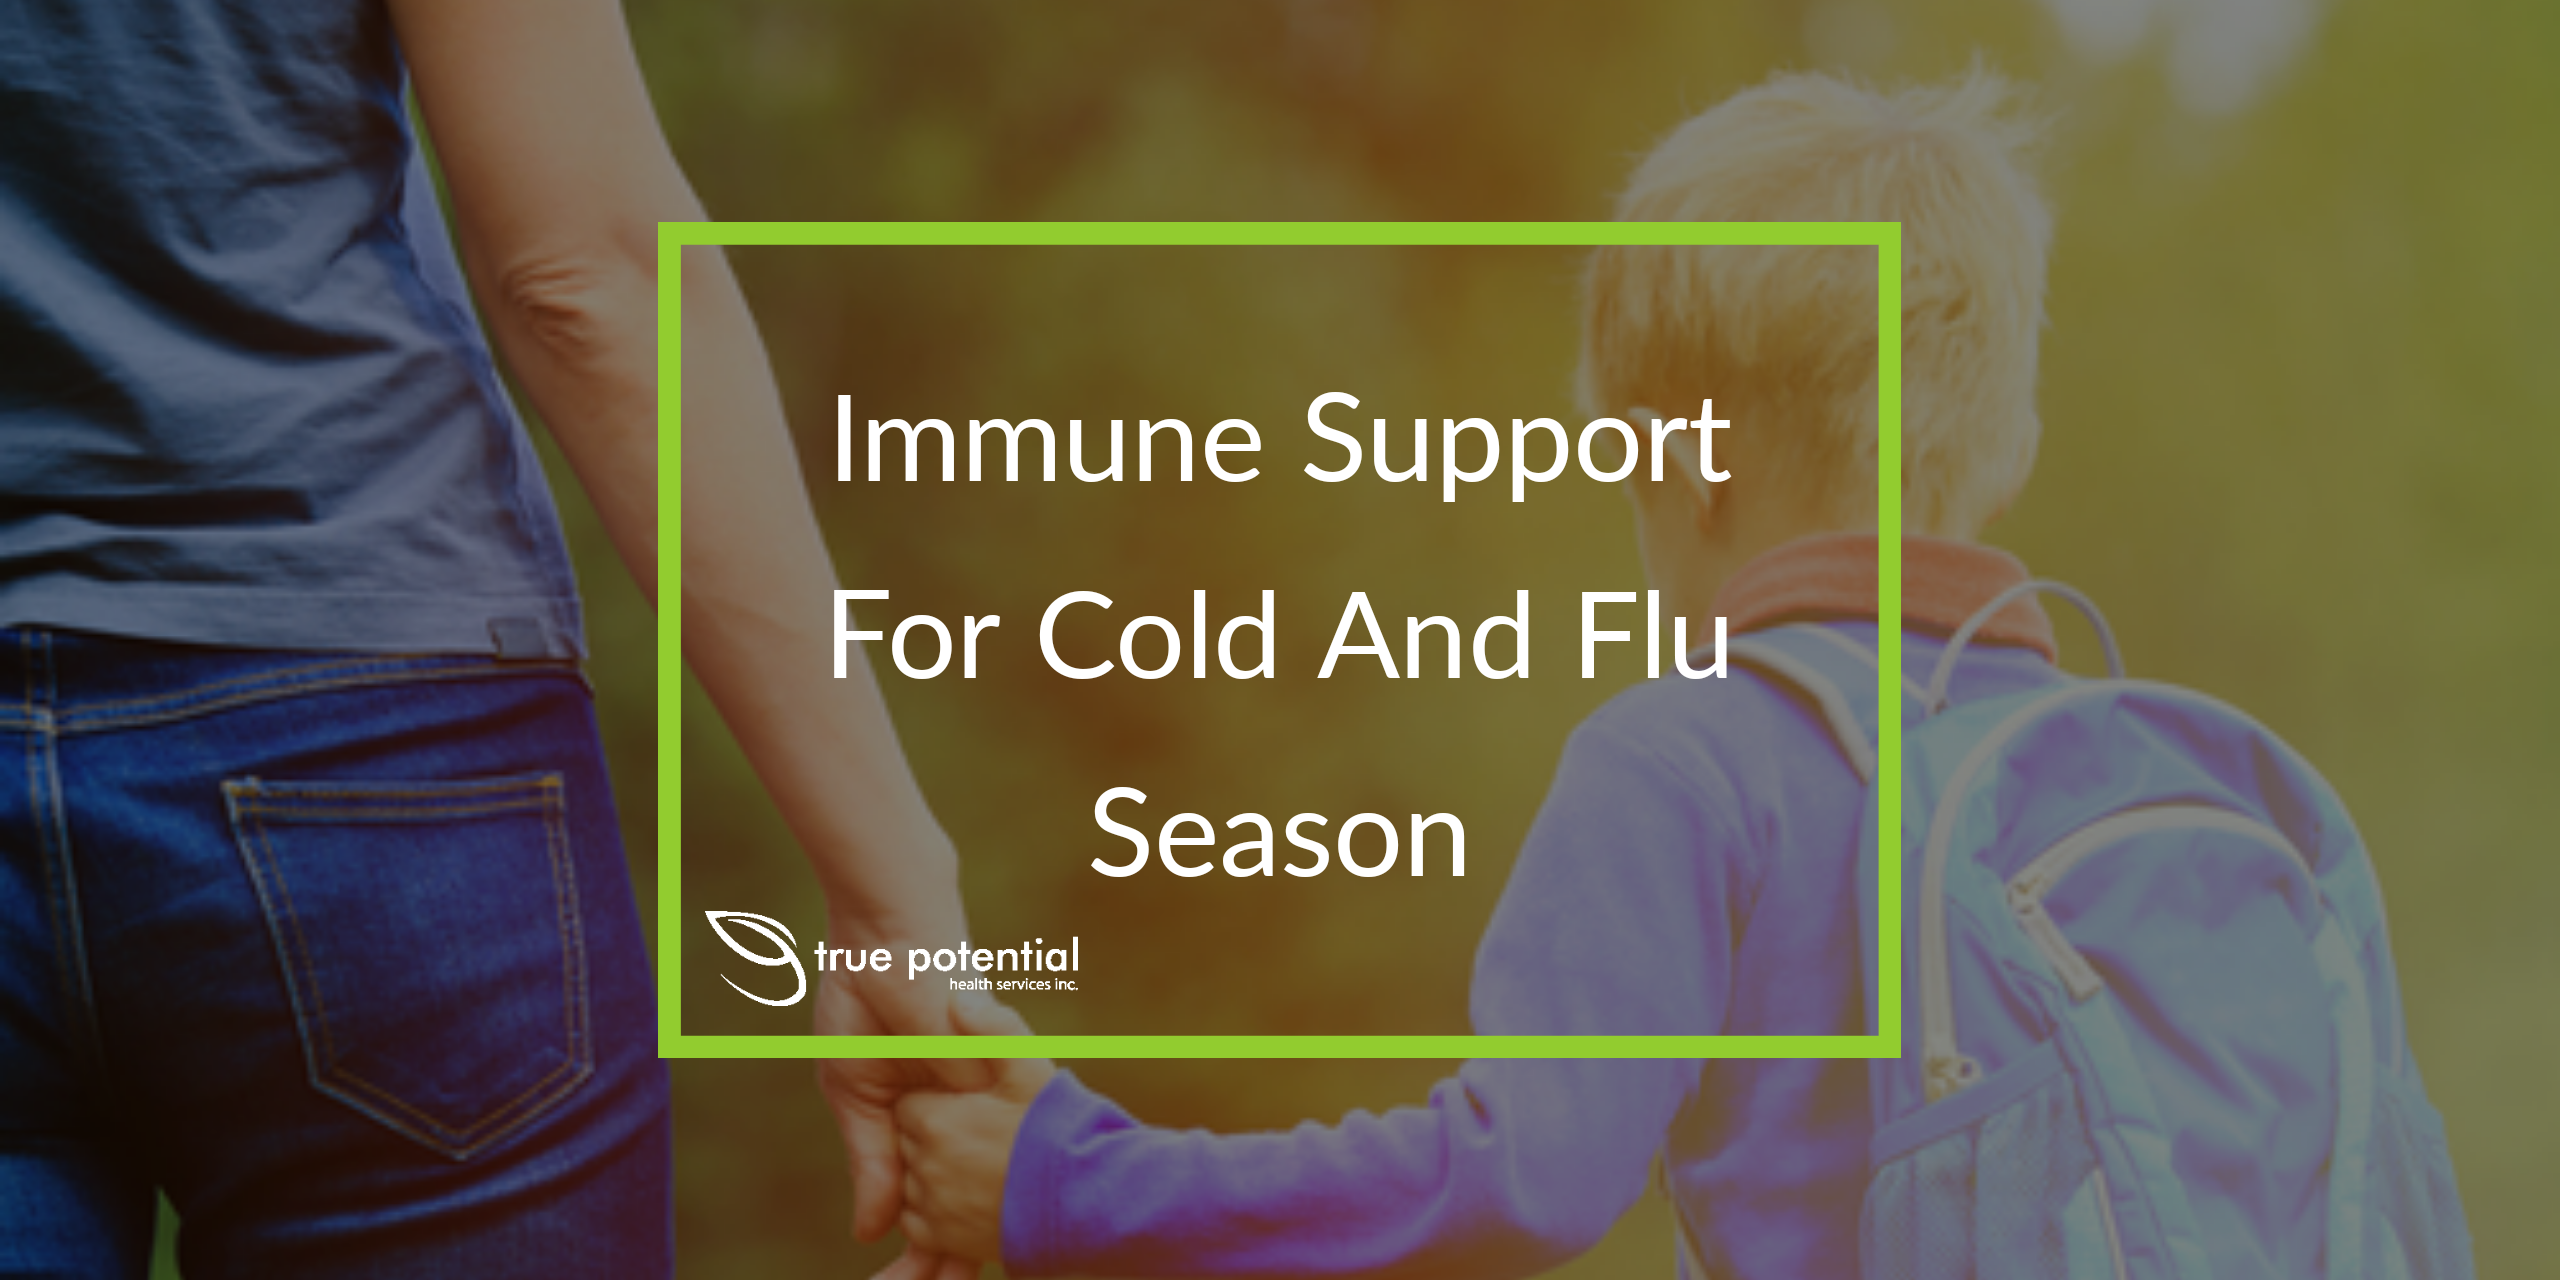 a healthy immune system helps you fight colds and flus